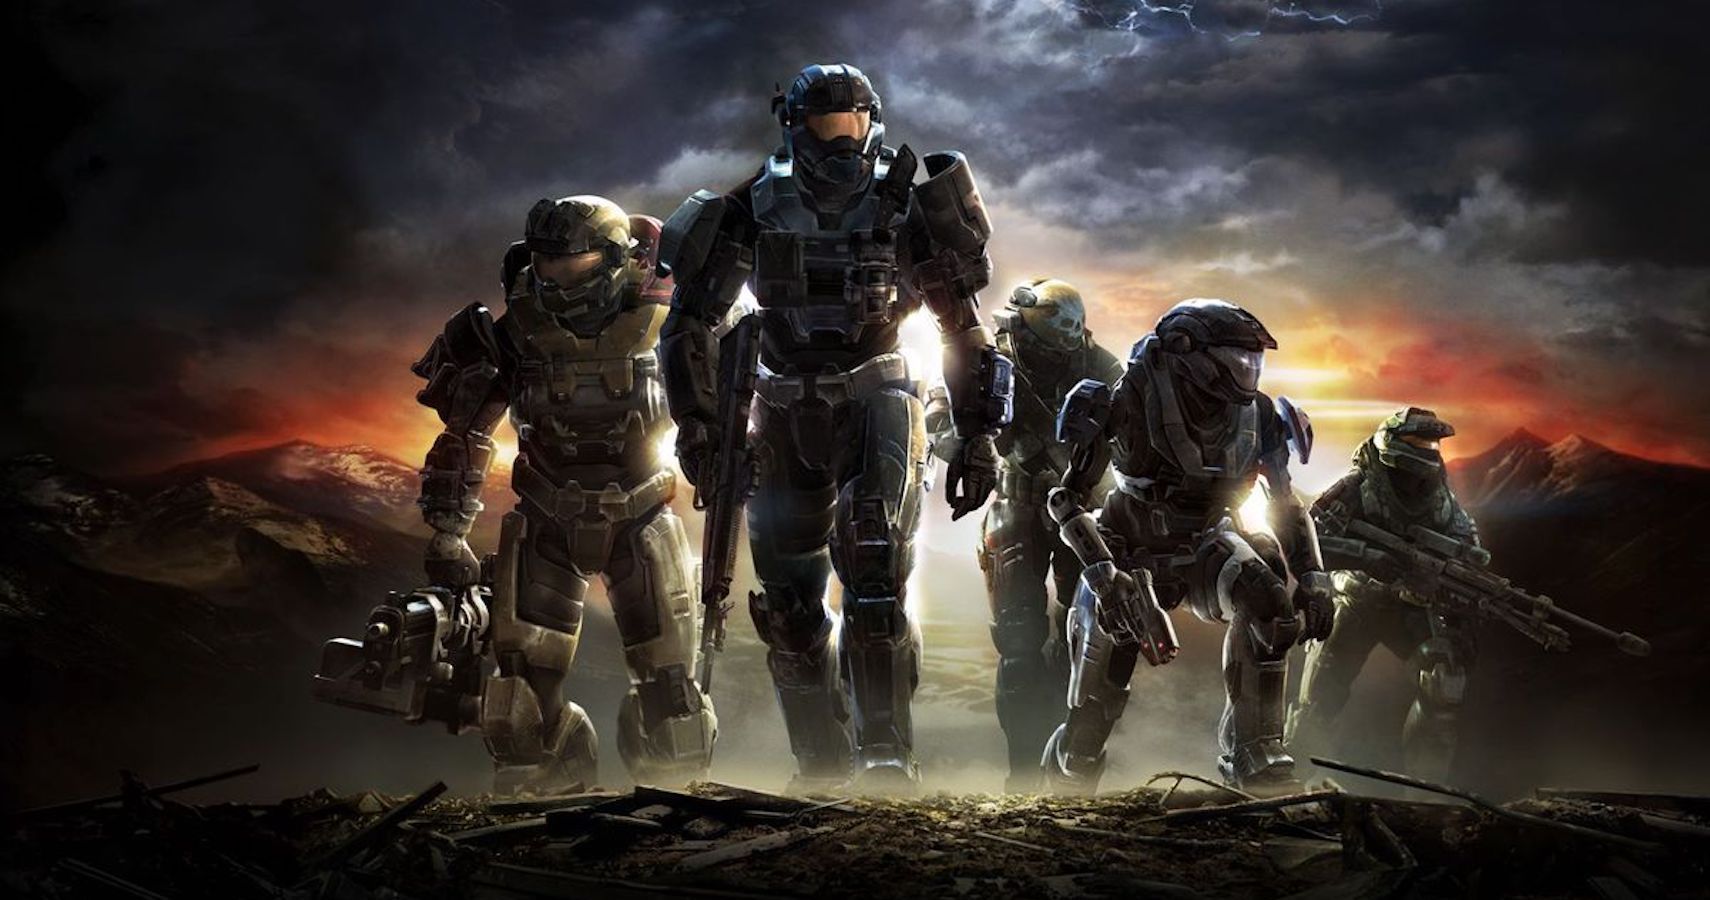 How To Play The Halo Master Chief Collection Early